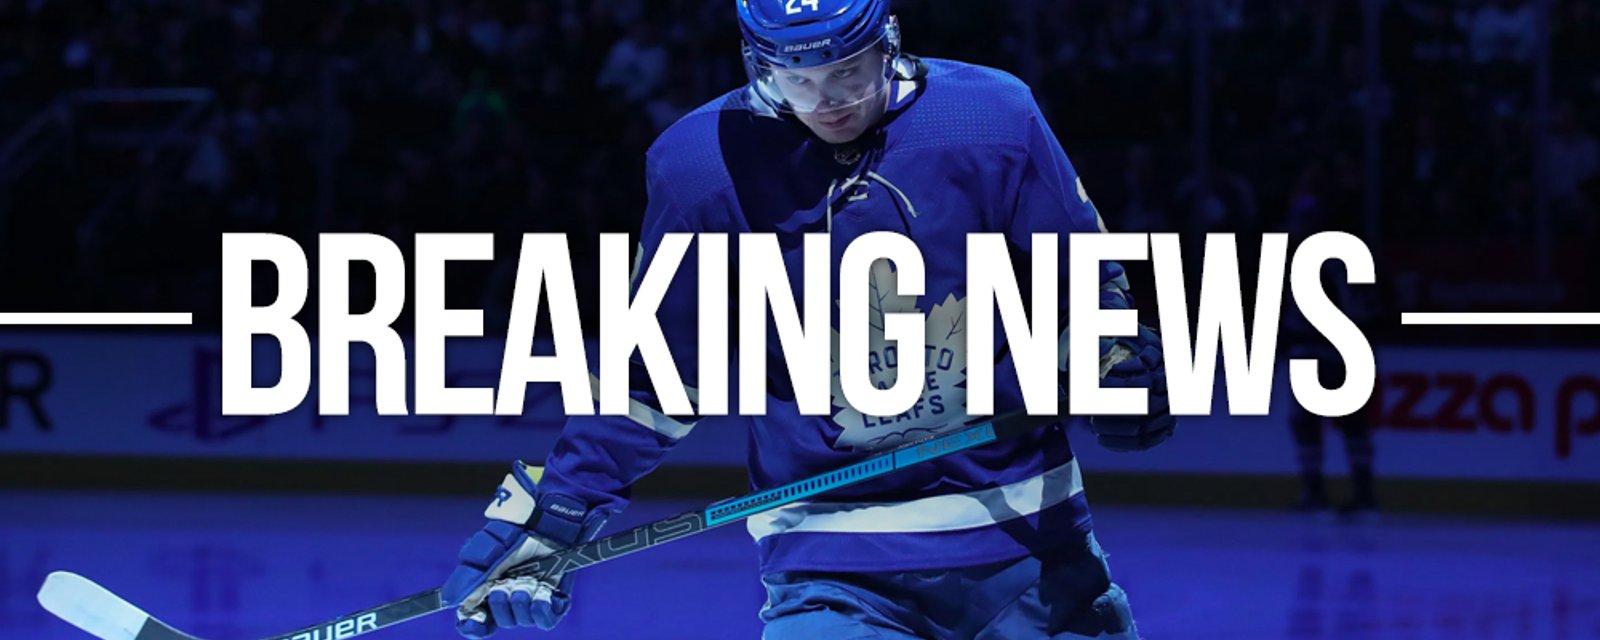 Leafs trade Kapanen to Penguins for a 1st round pick and prospects